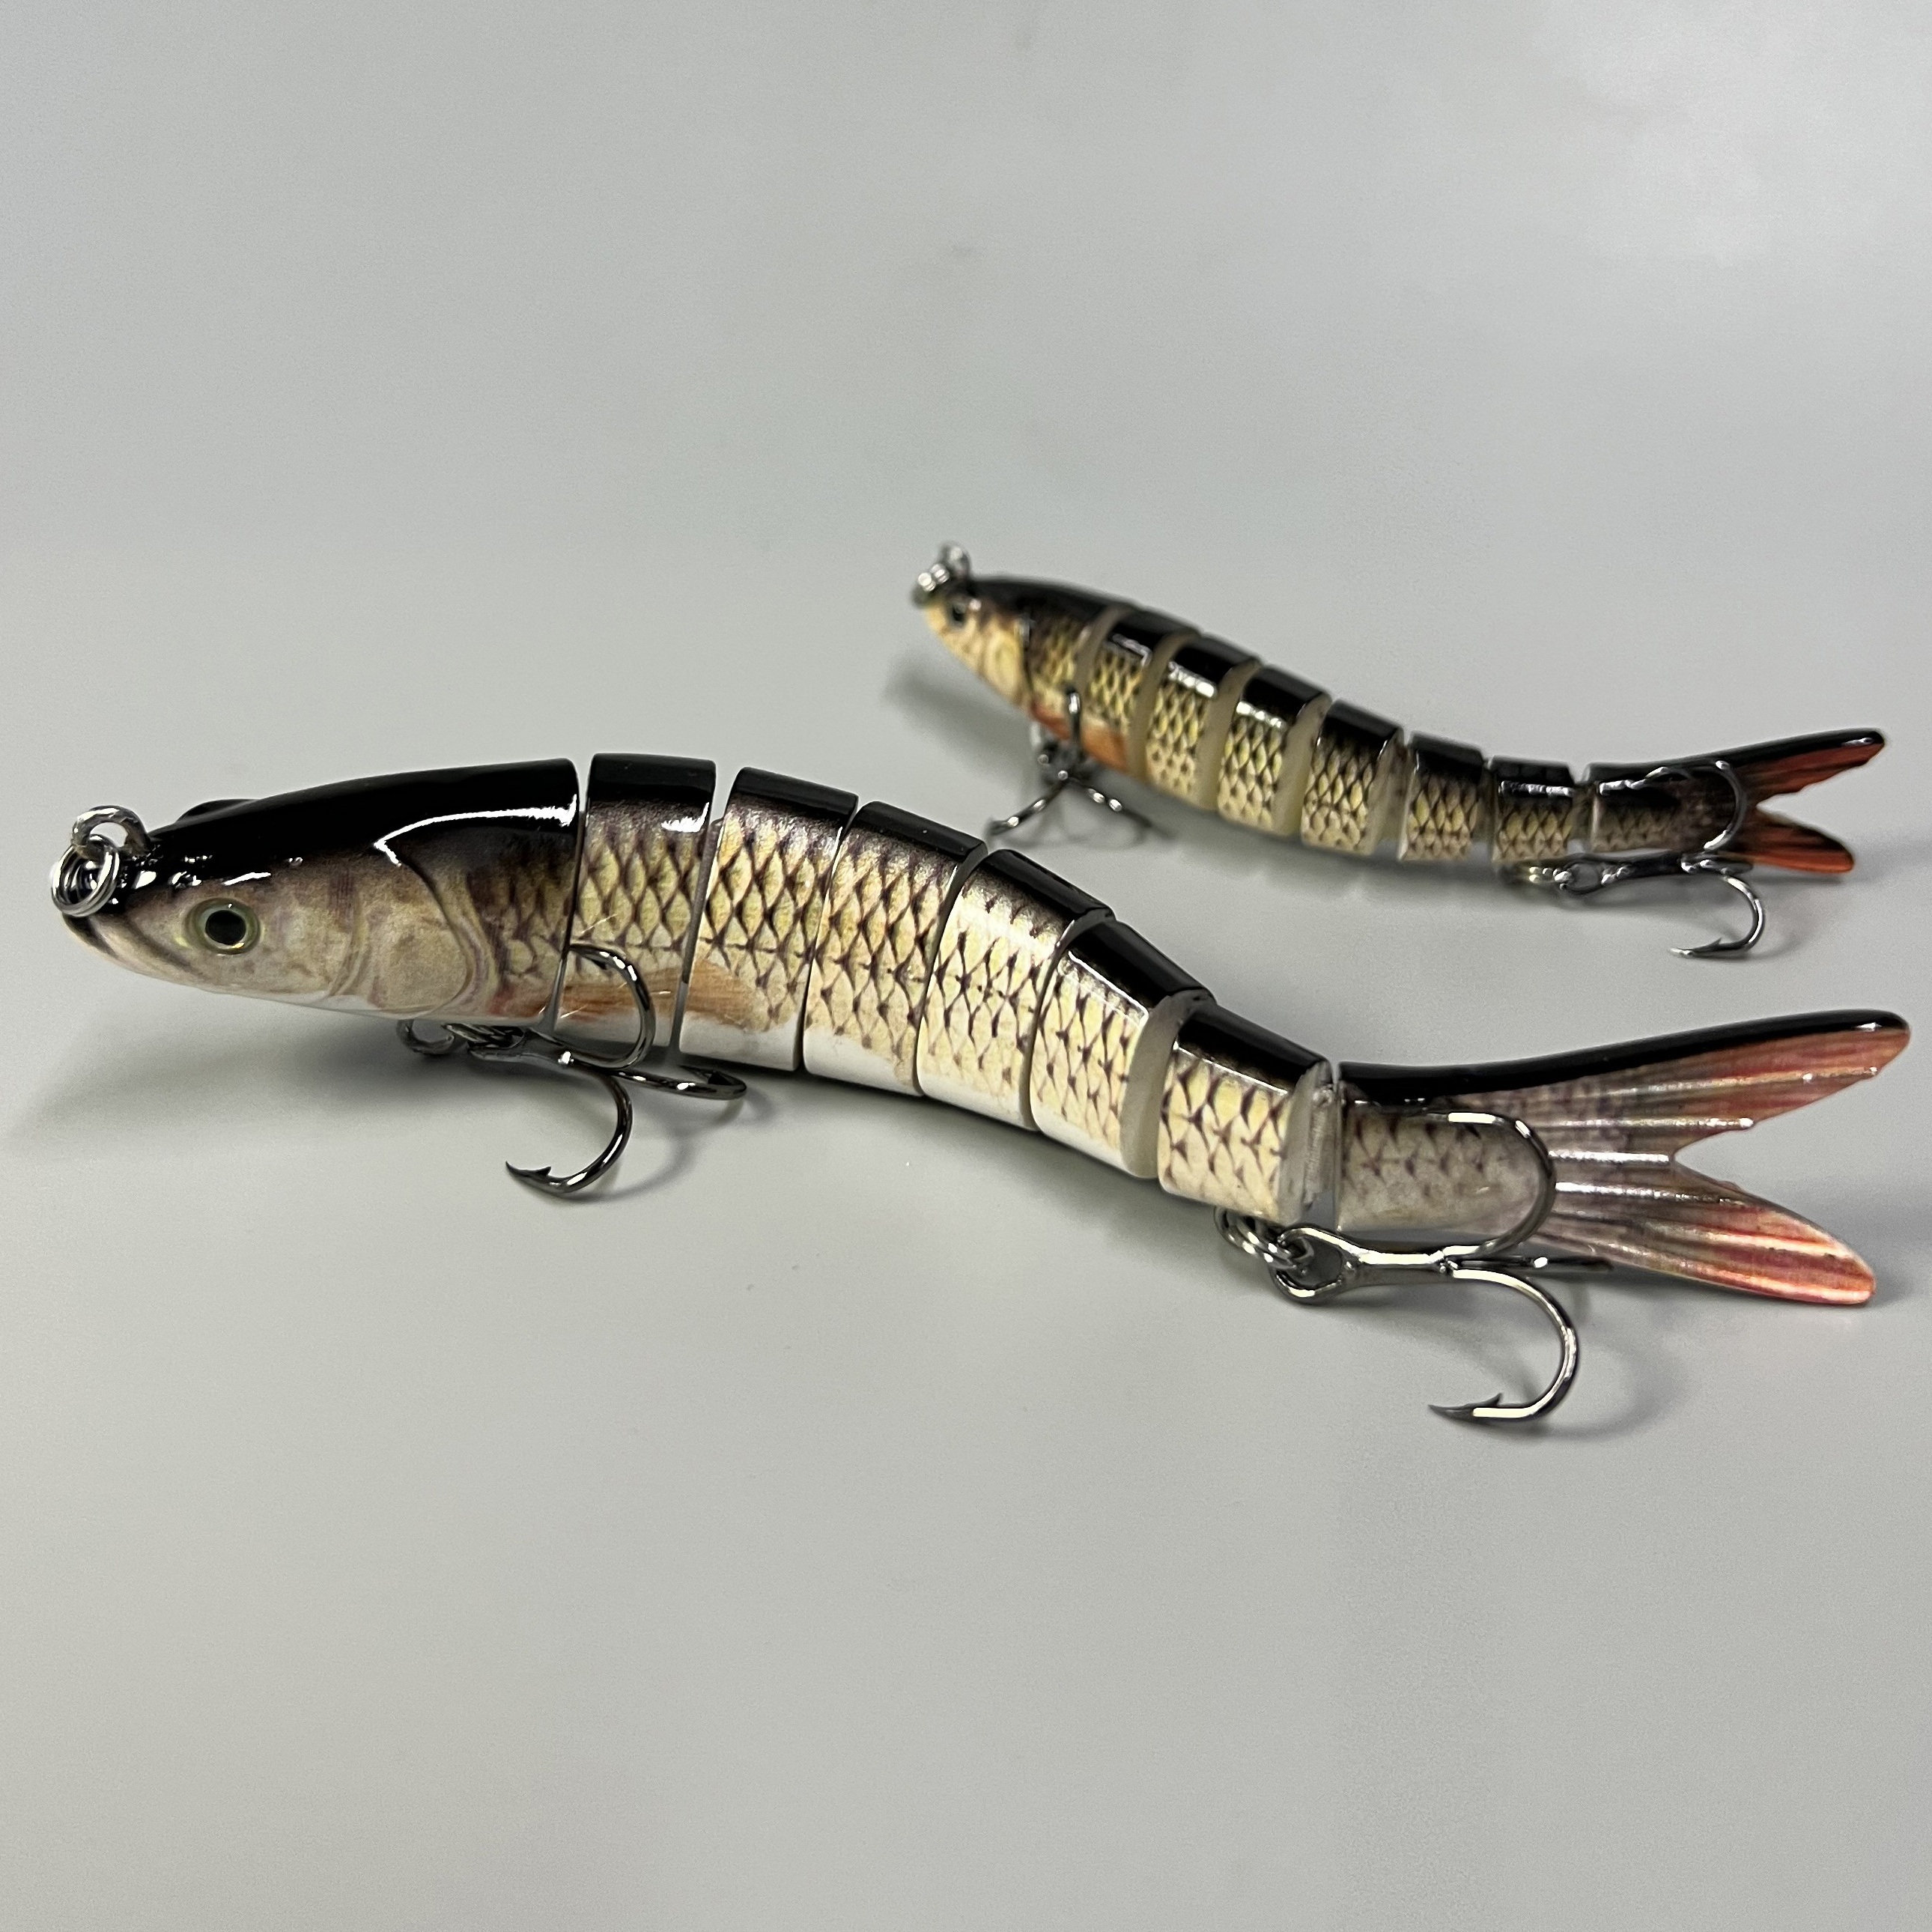 NEW 1PC Jointed Lures Hard Bait Sinking Lure 14cm 58g Fishing